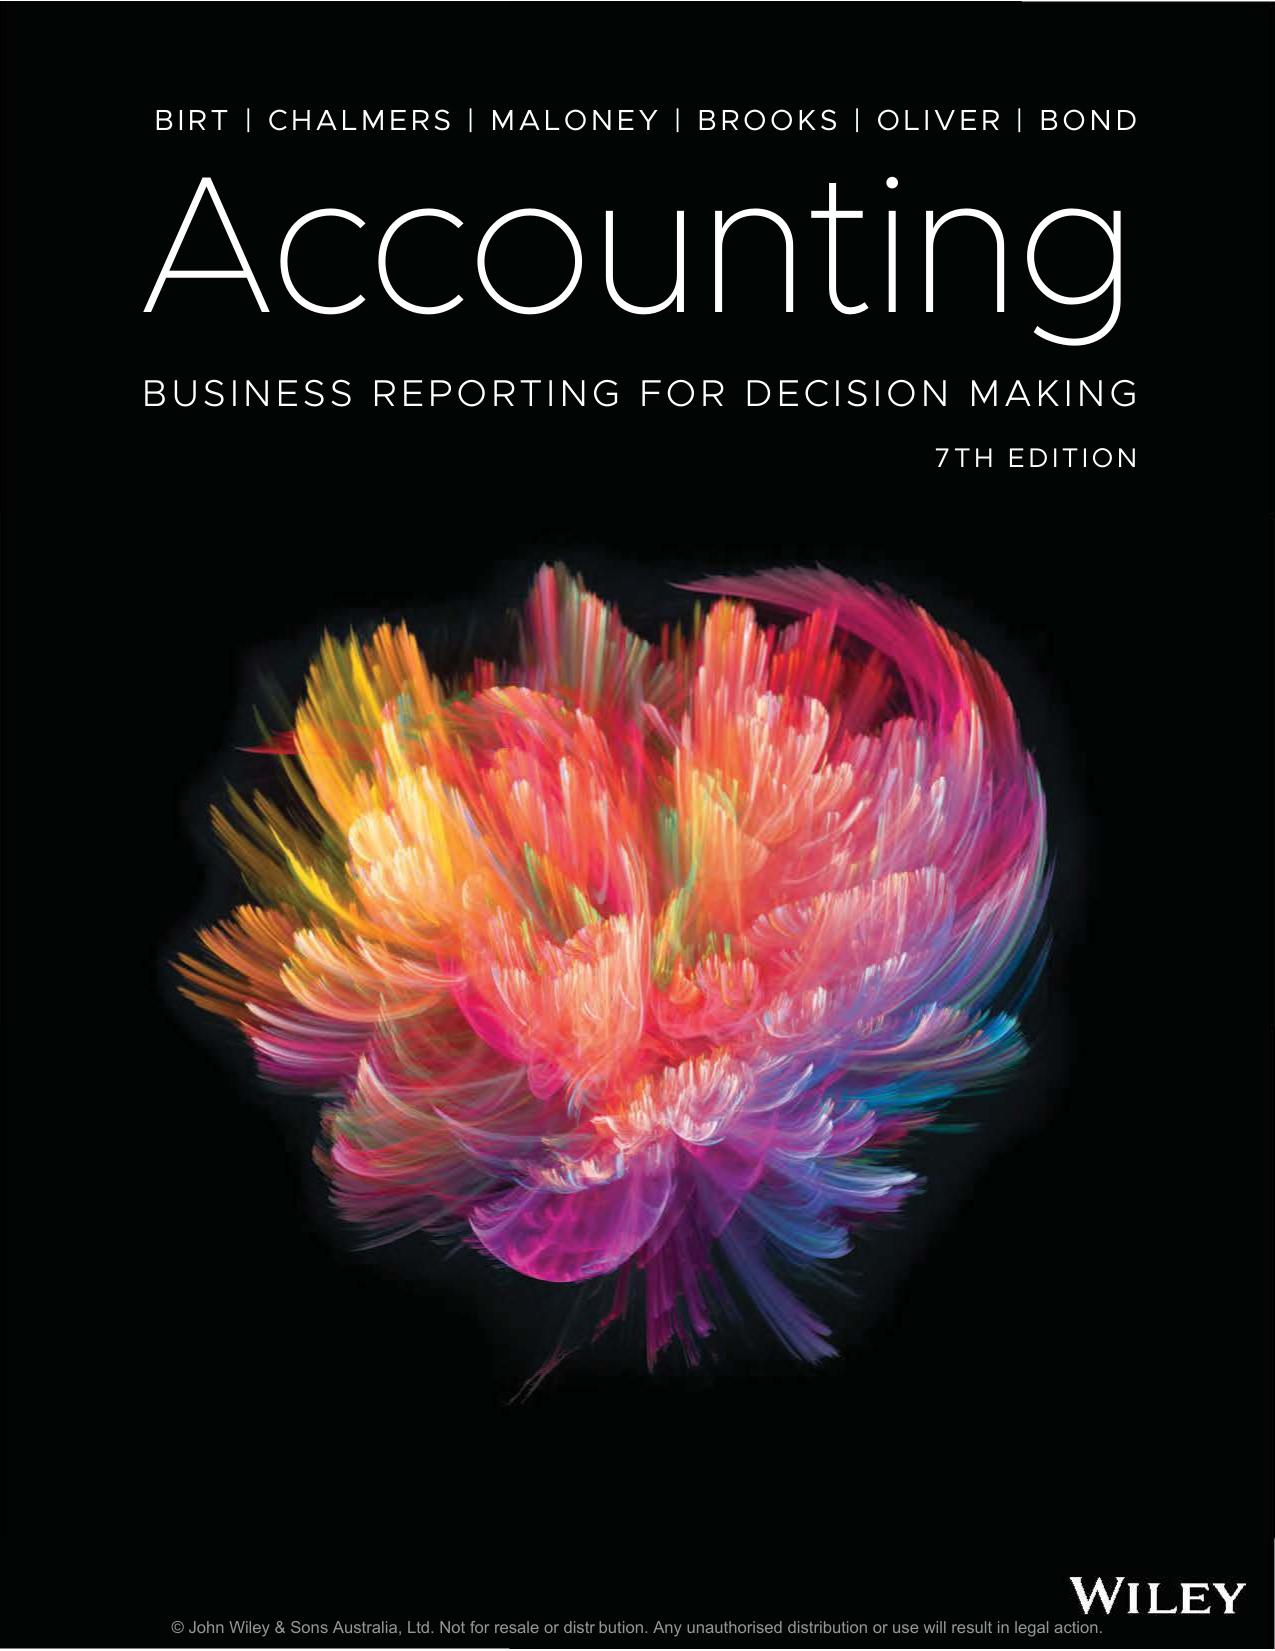 Accounting Business Reporting for Decision Making 7th by Jacqueline Birt 120Yuan  - LPegram.jpg